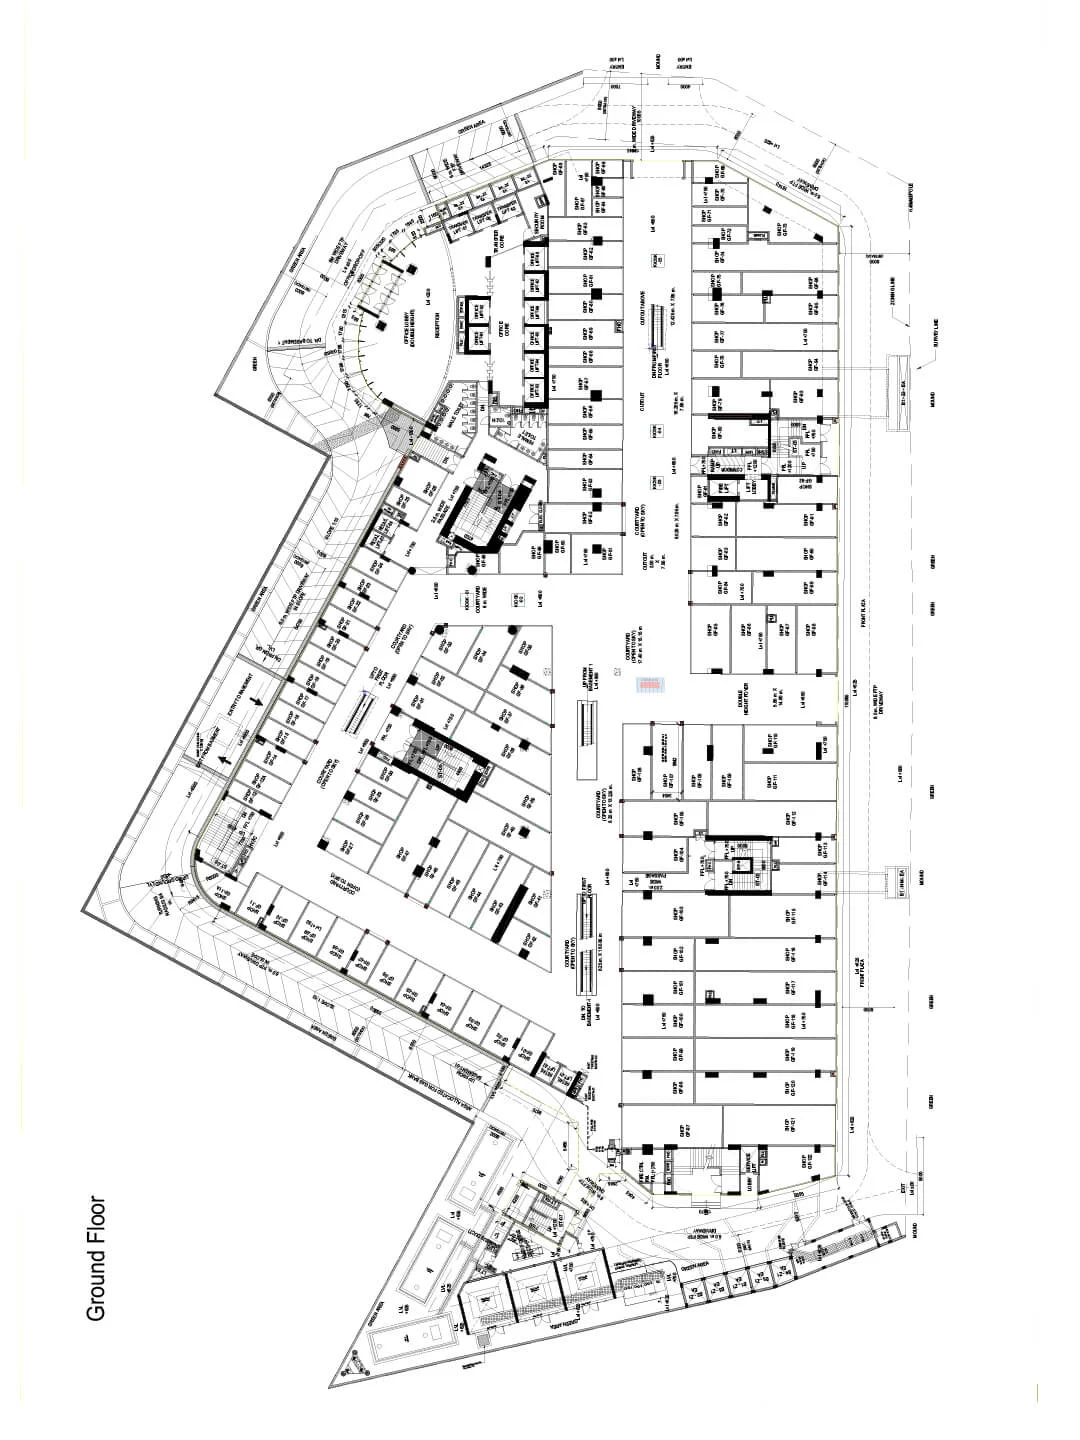 Aipl Central ground floor layout